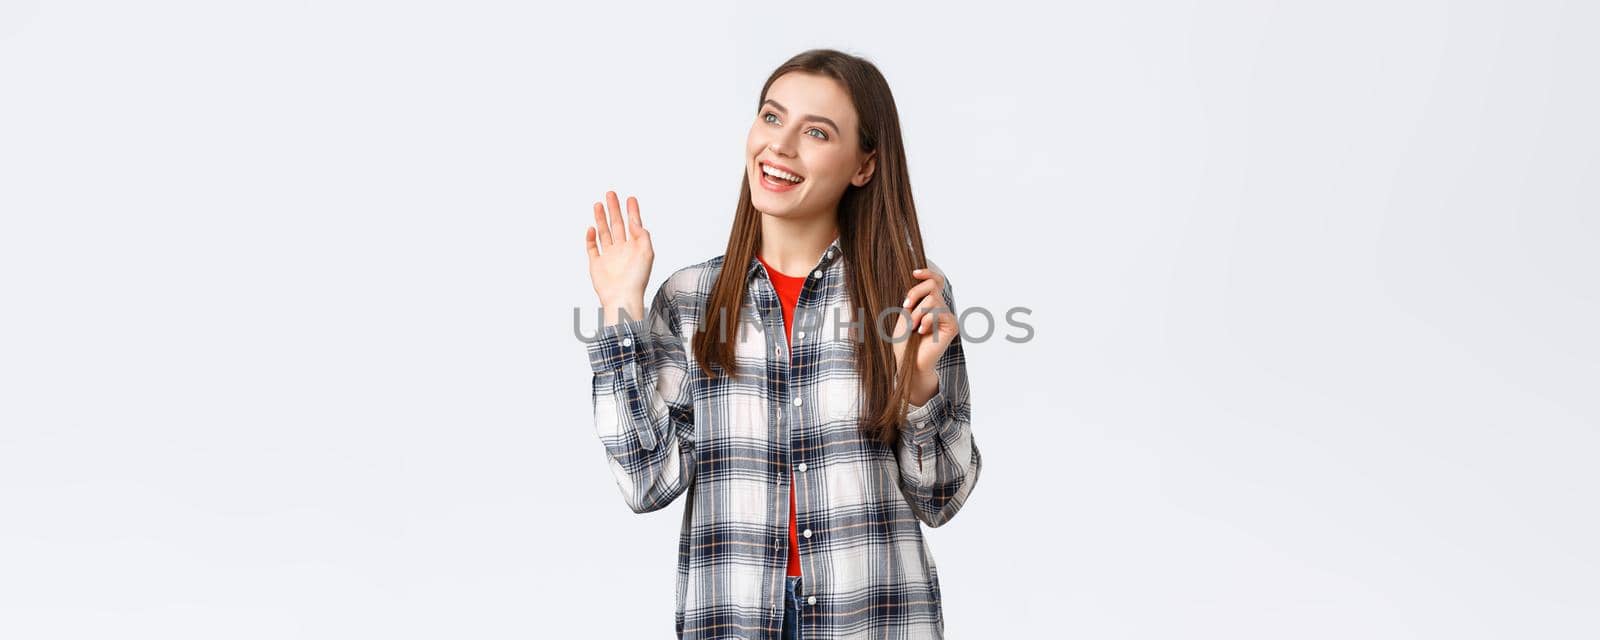 Lifestyle, different emotions, leisure activities concept. Cheerful, friendly attractive woman saying hi, meeting person at cafe, turn head and looking left, waving hello, greeting gesture.